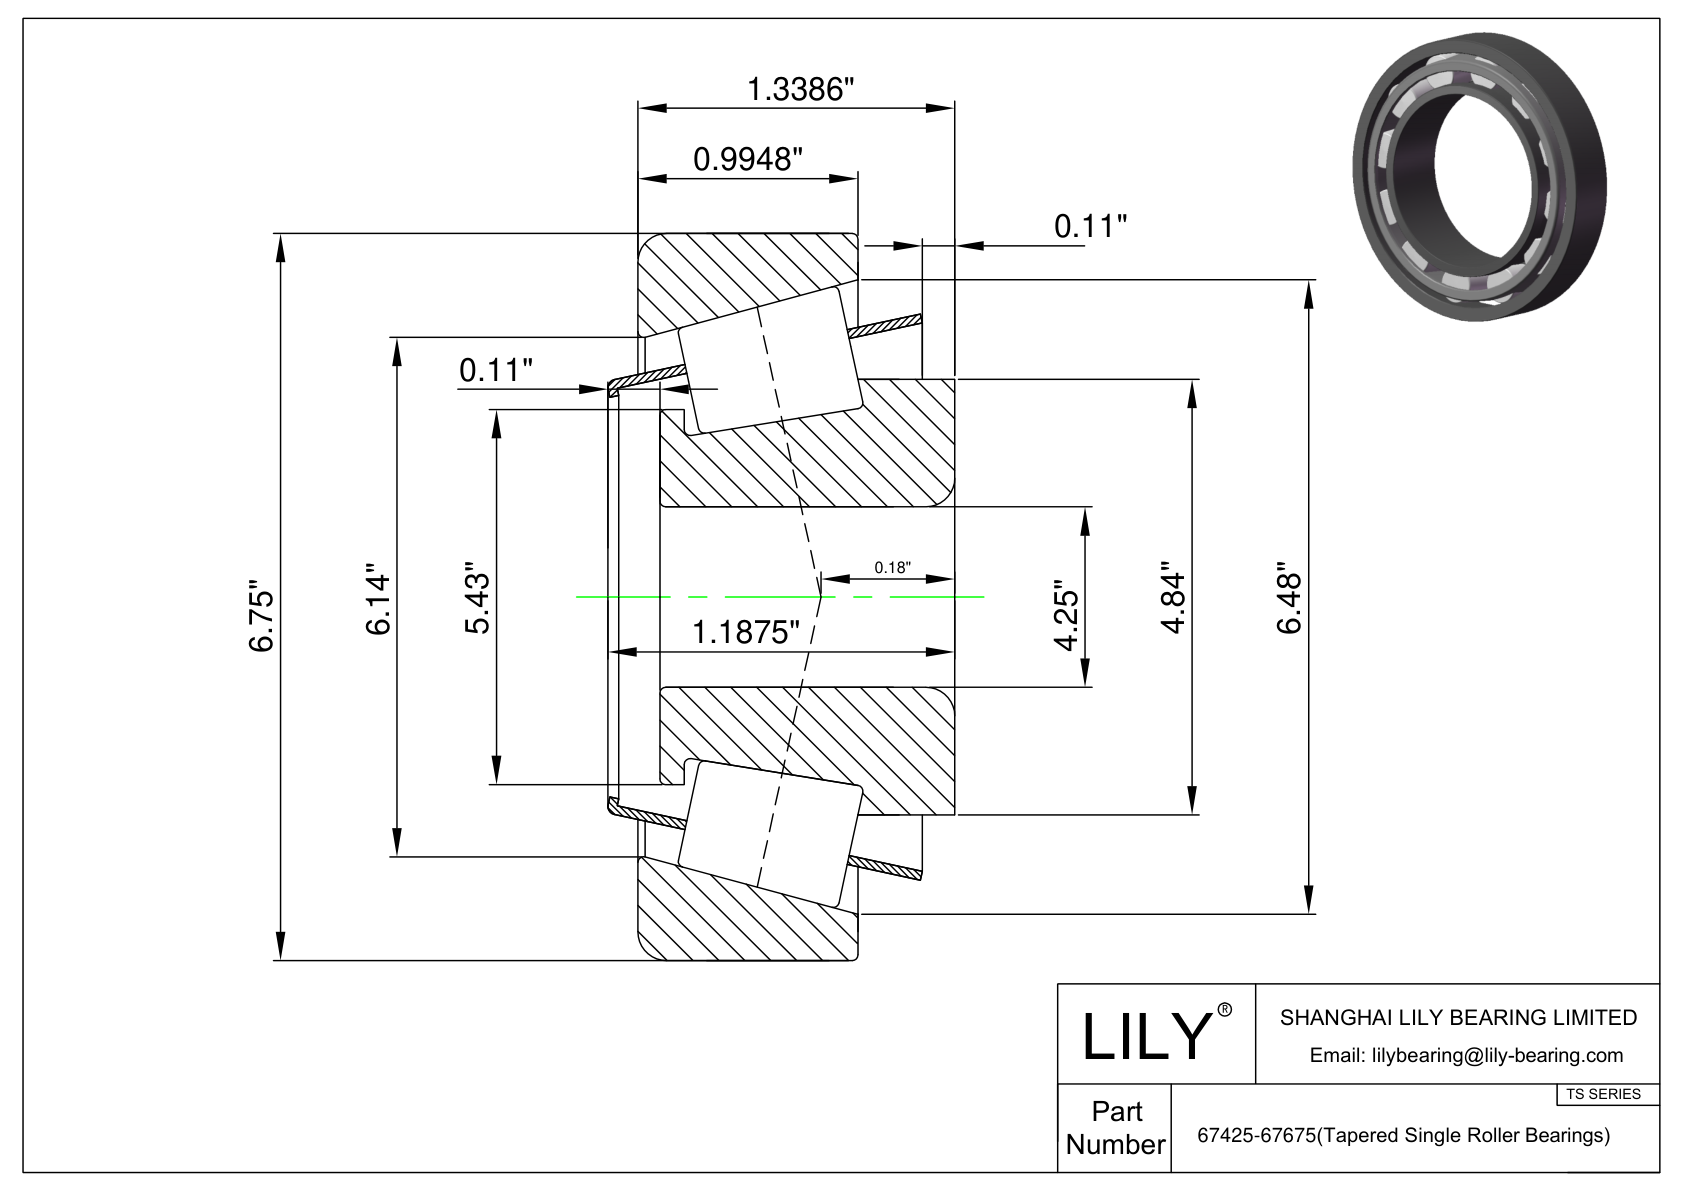 67425-67675 TS (Tapered Single Roller Bearings) (Imperial) cad drawing